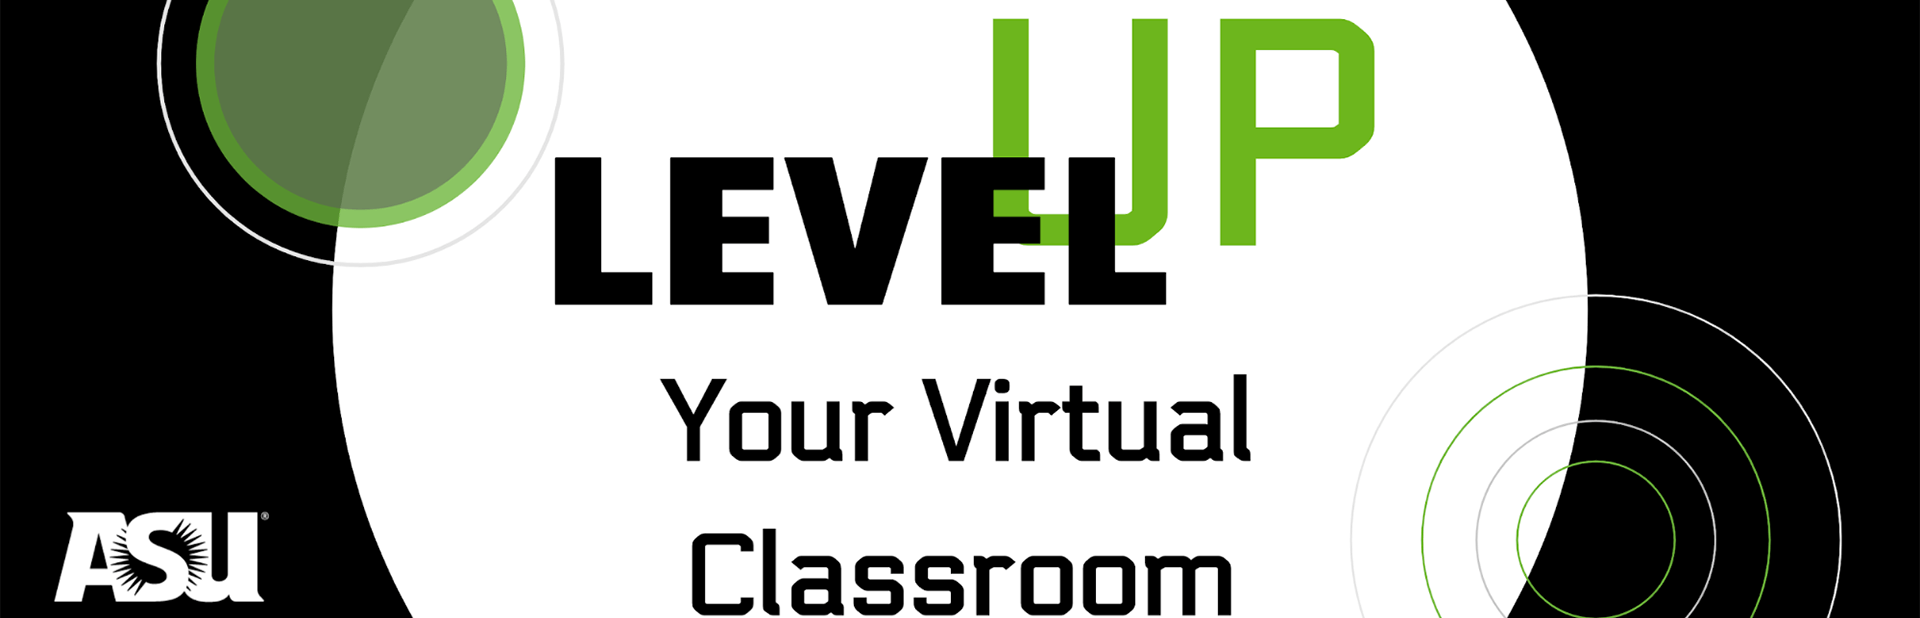 Level up your virtual classroom